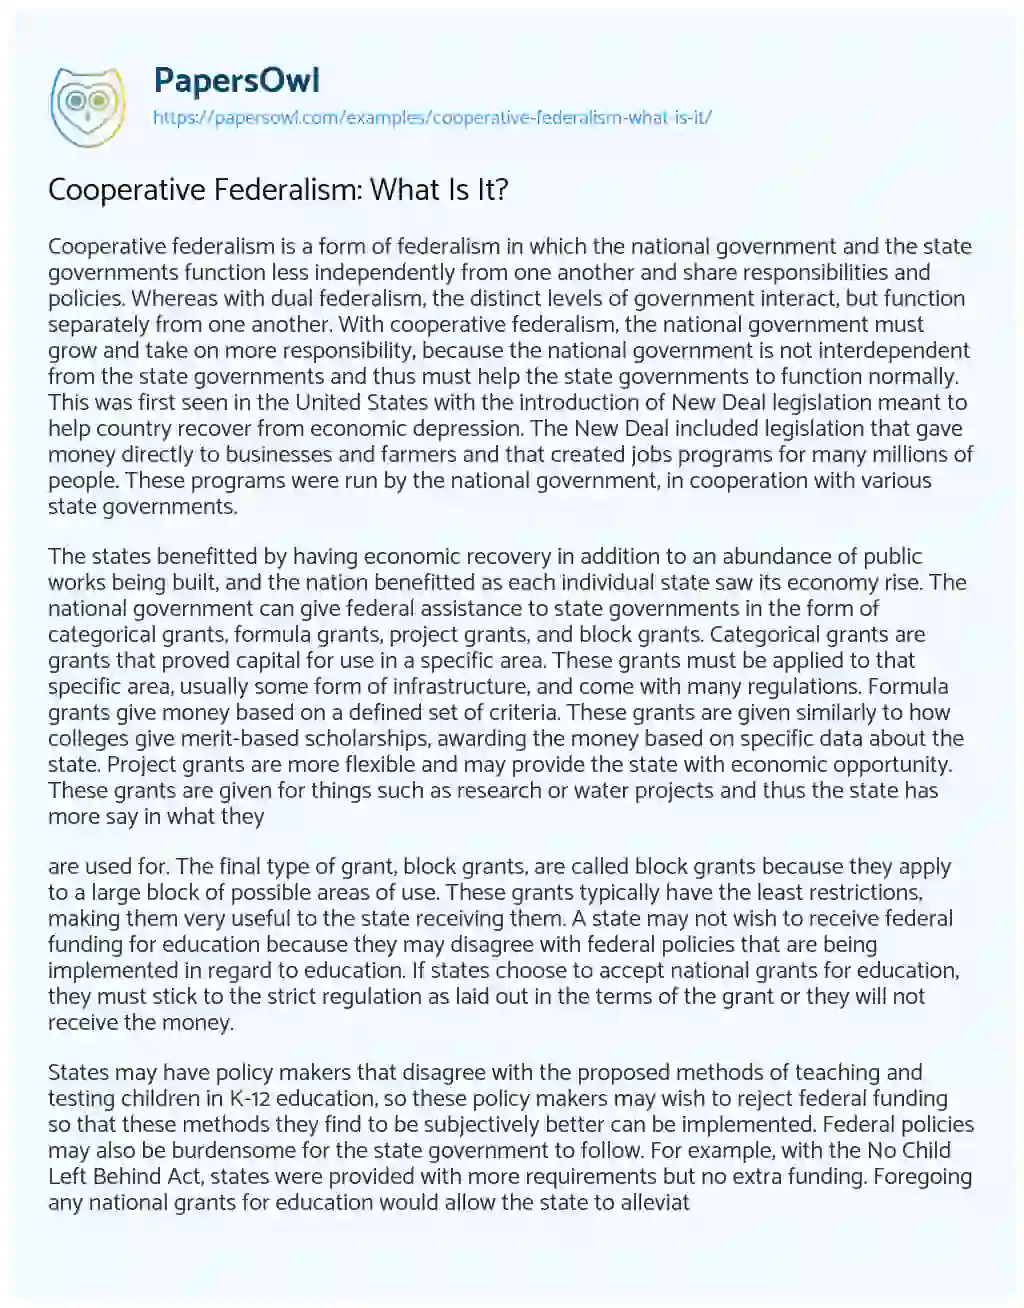 Essay on Cooperative Federalism: what is It?